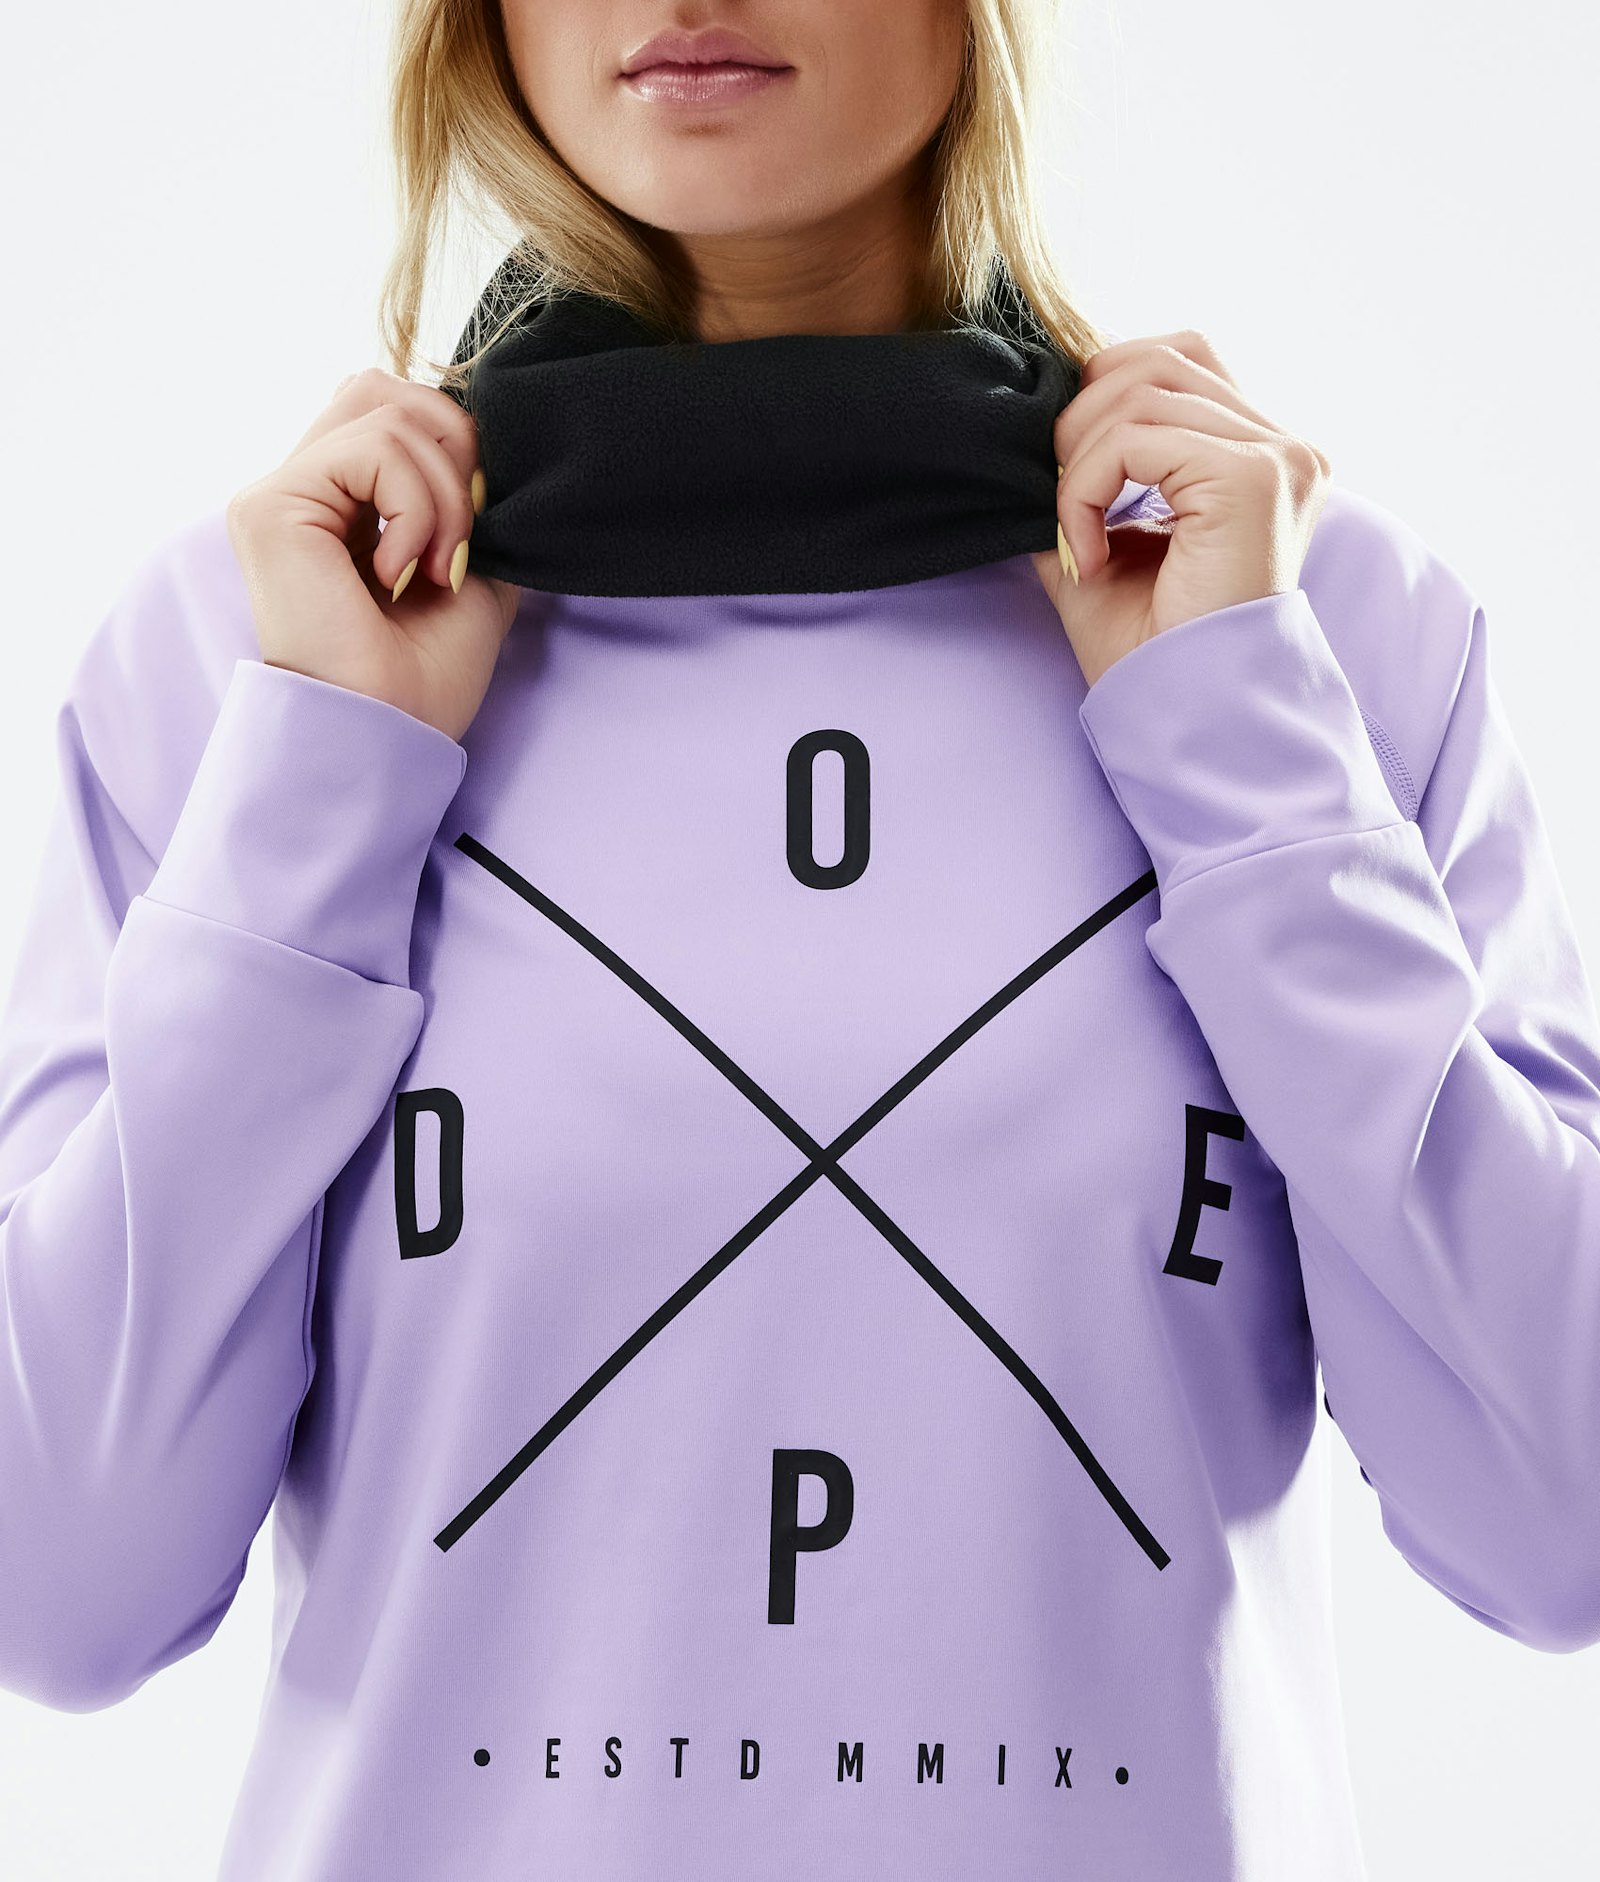 Dope Snuggle W Basislaag Top Dames 2X-Up Faded Violet